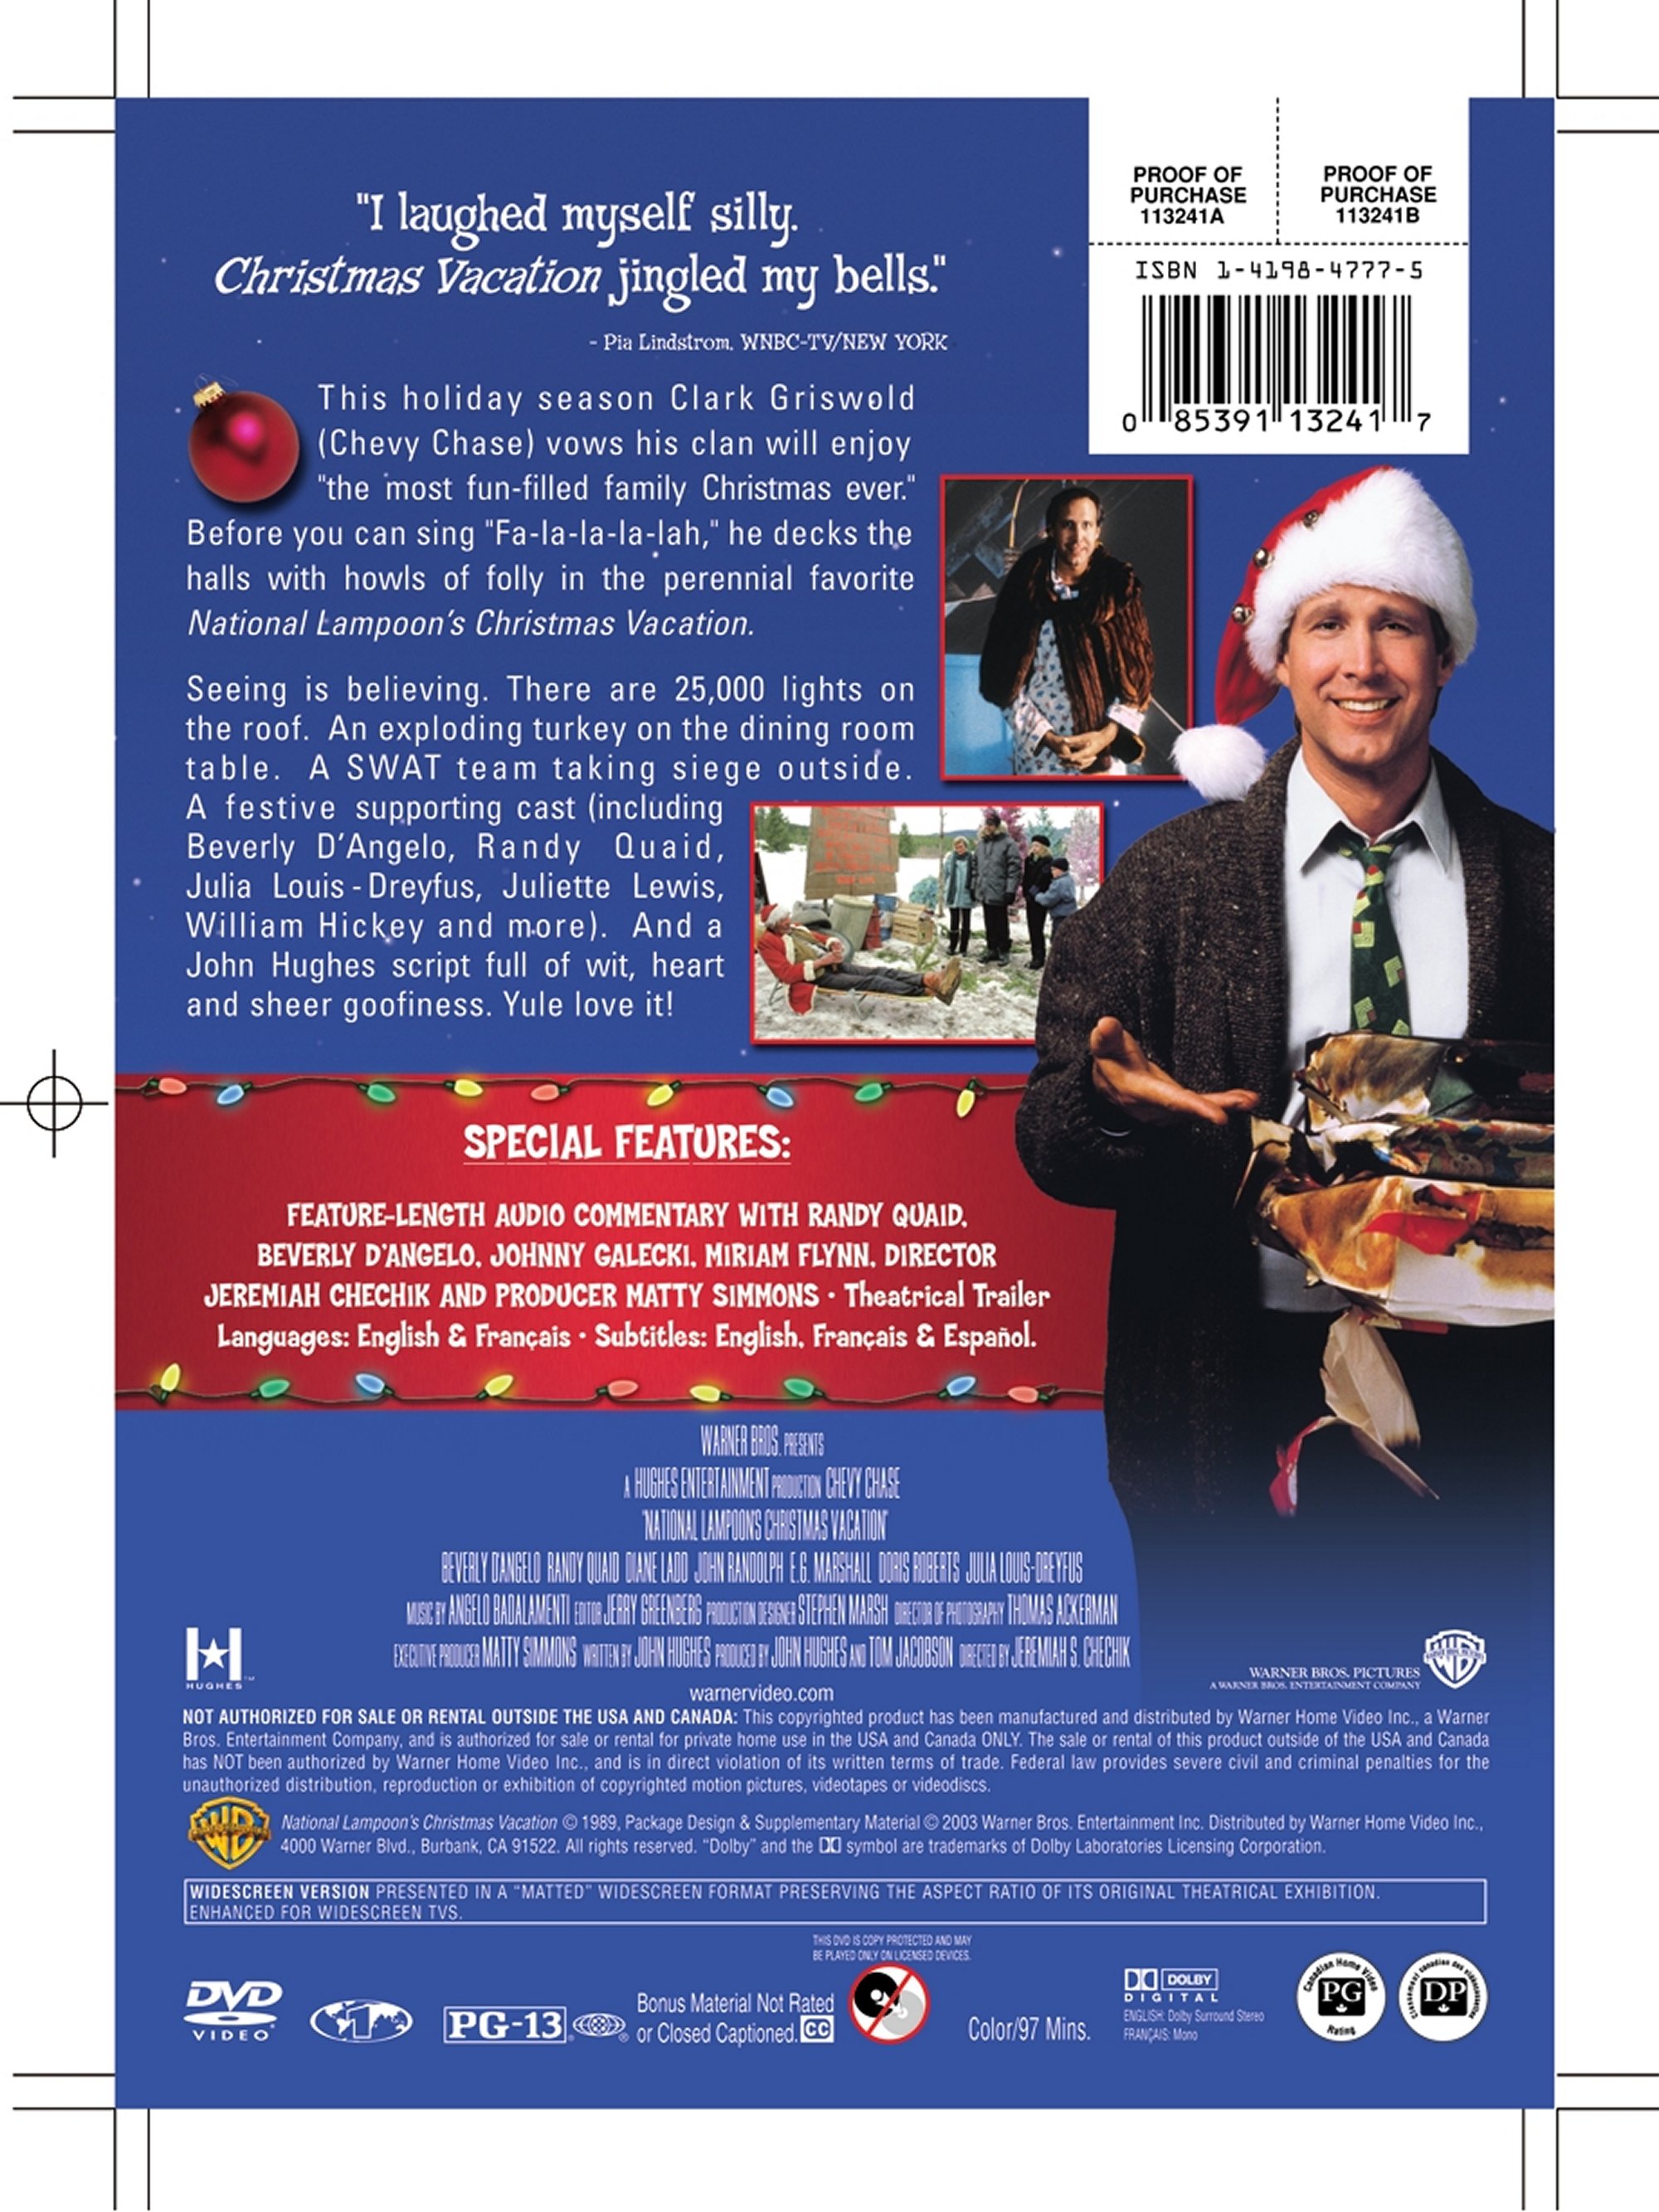 National Lampoon's Christmas Vacation (DVD), Warner Home Video, Comedy - image 2 of 7